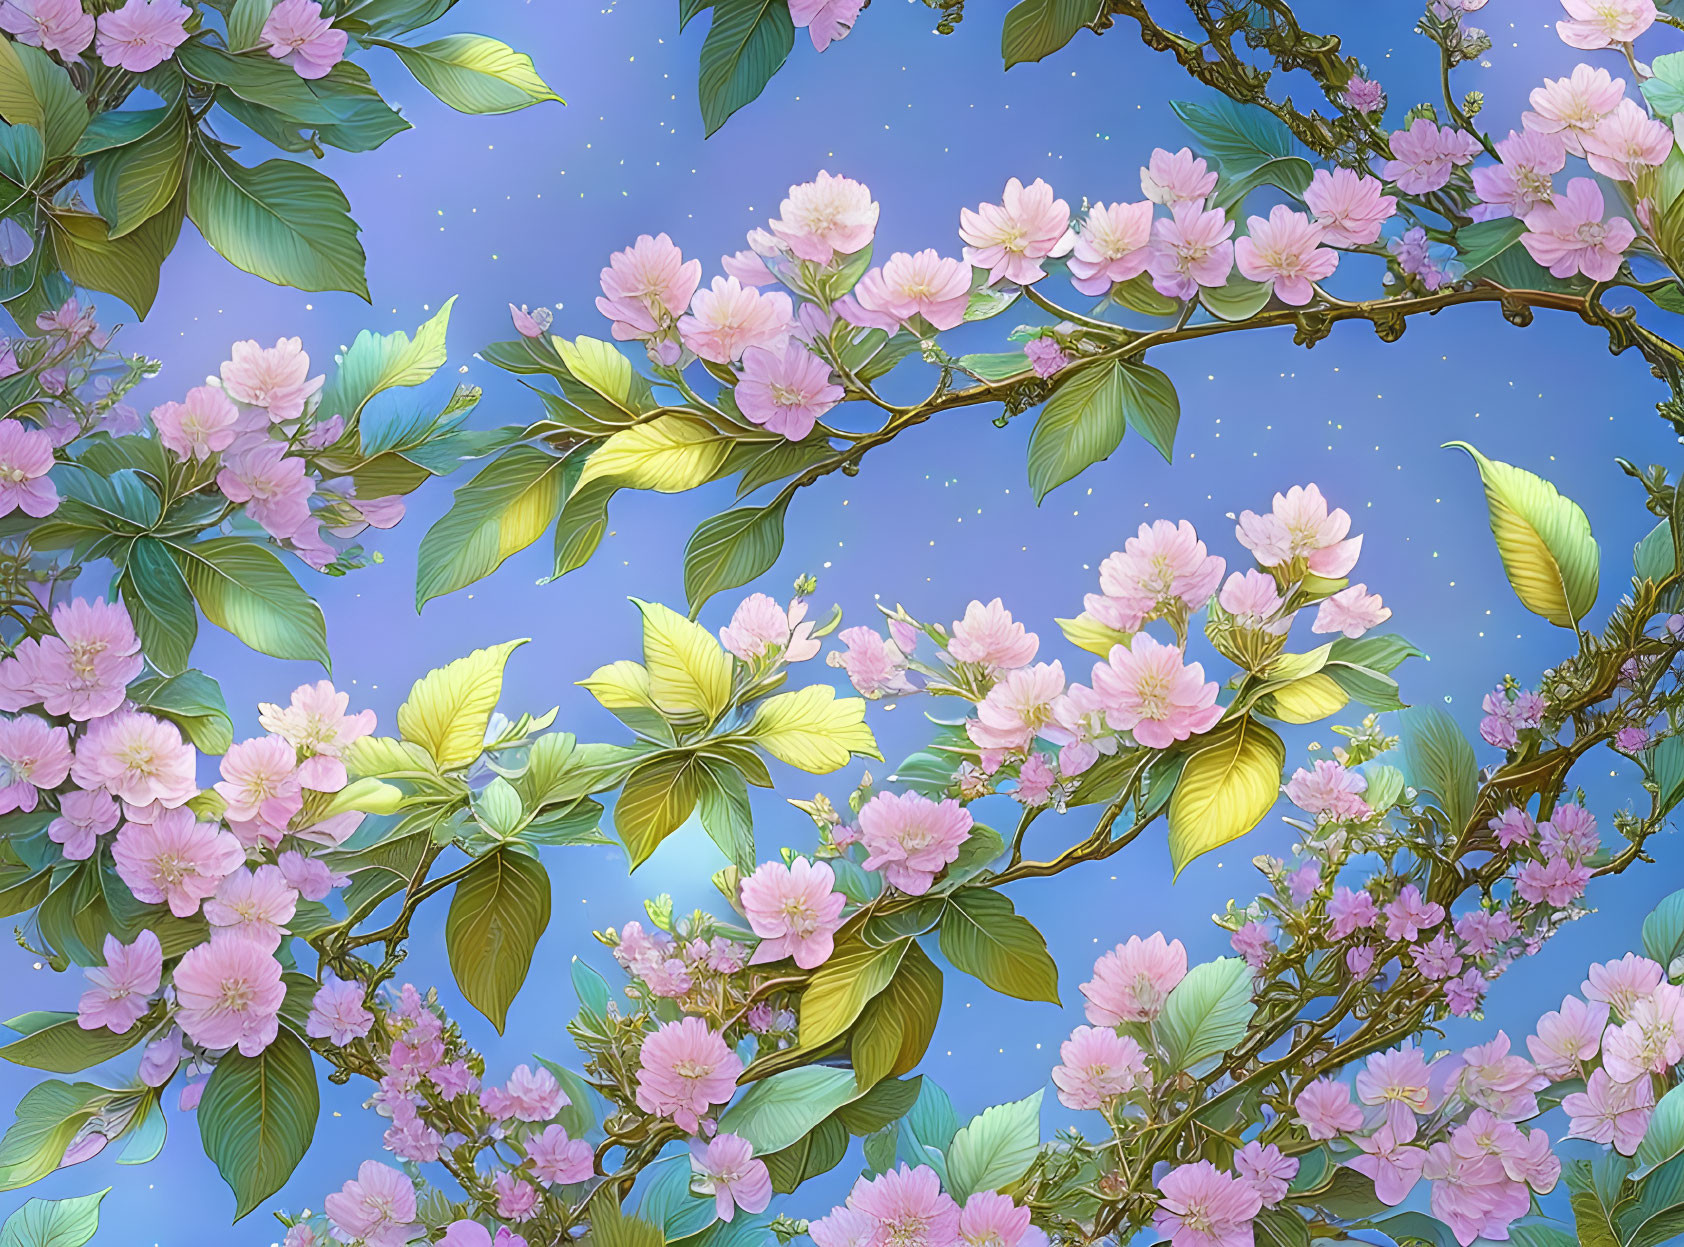 Lush Branches with Pink Blossoms in Blue Sky